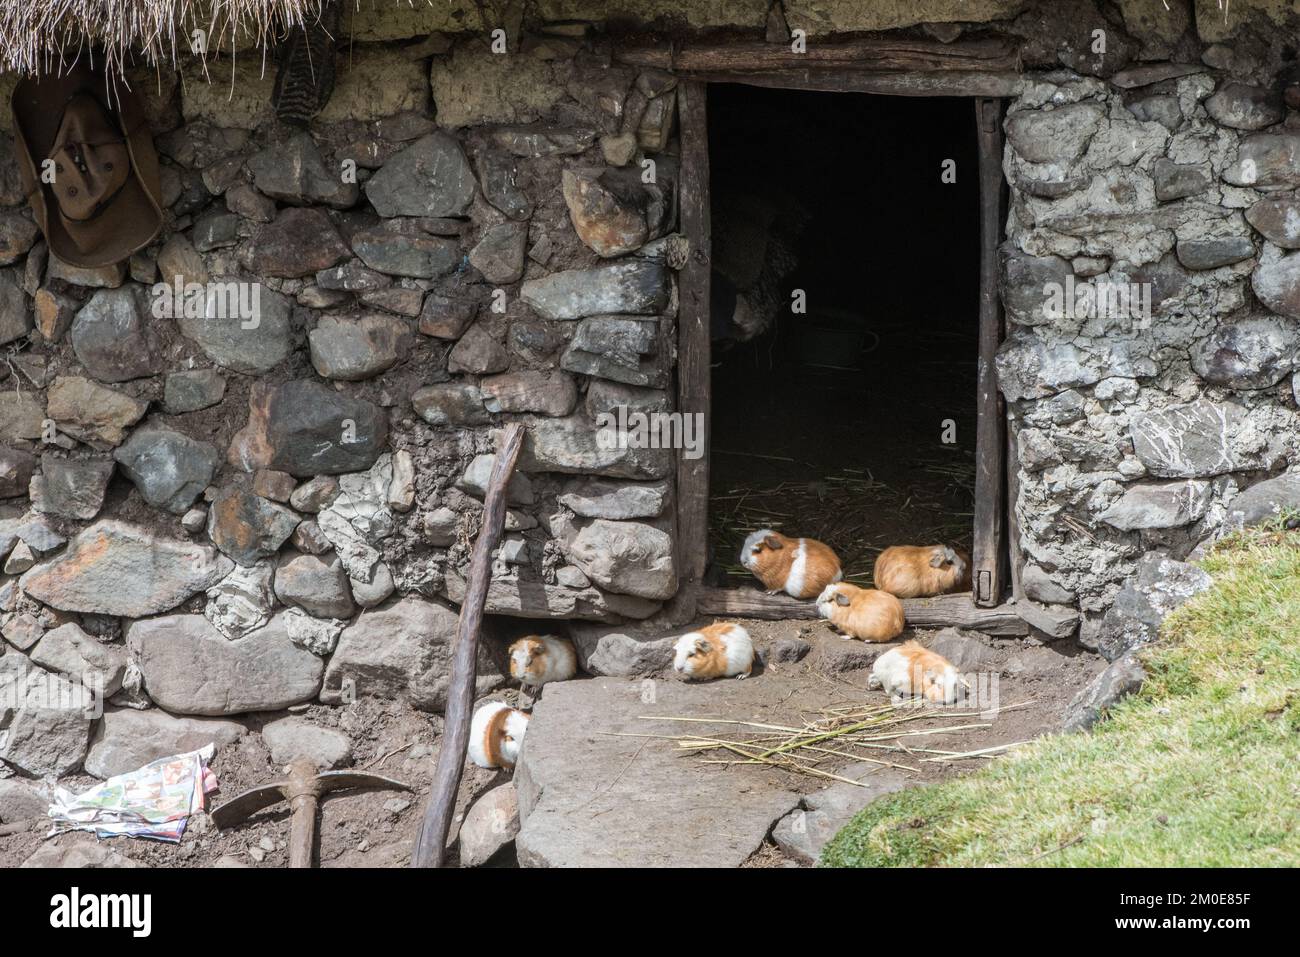 Domestic guinea pigs (Cavia porcellus) crowd in the doorway of a stone hut in the Andes where they are livestock being raised for food. Stock Photo